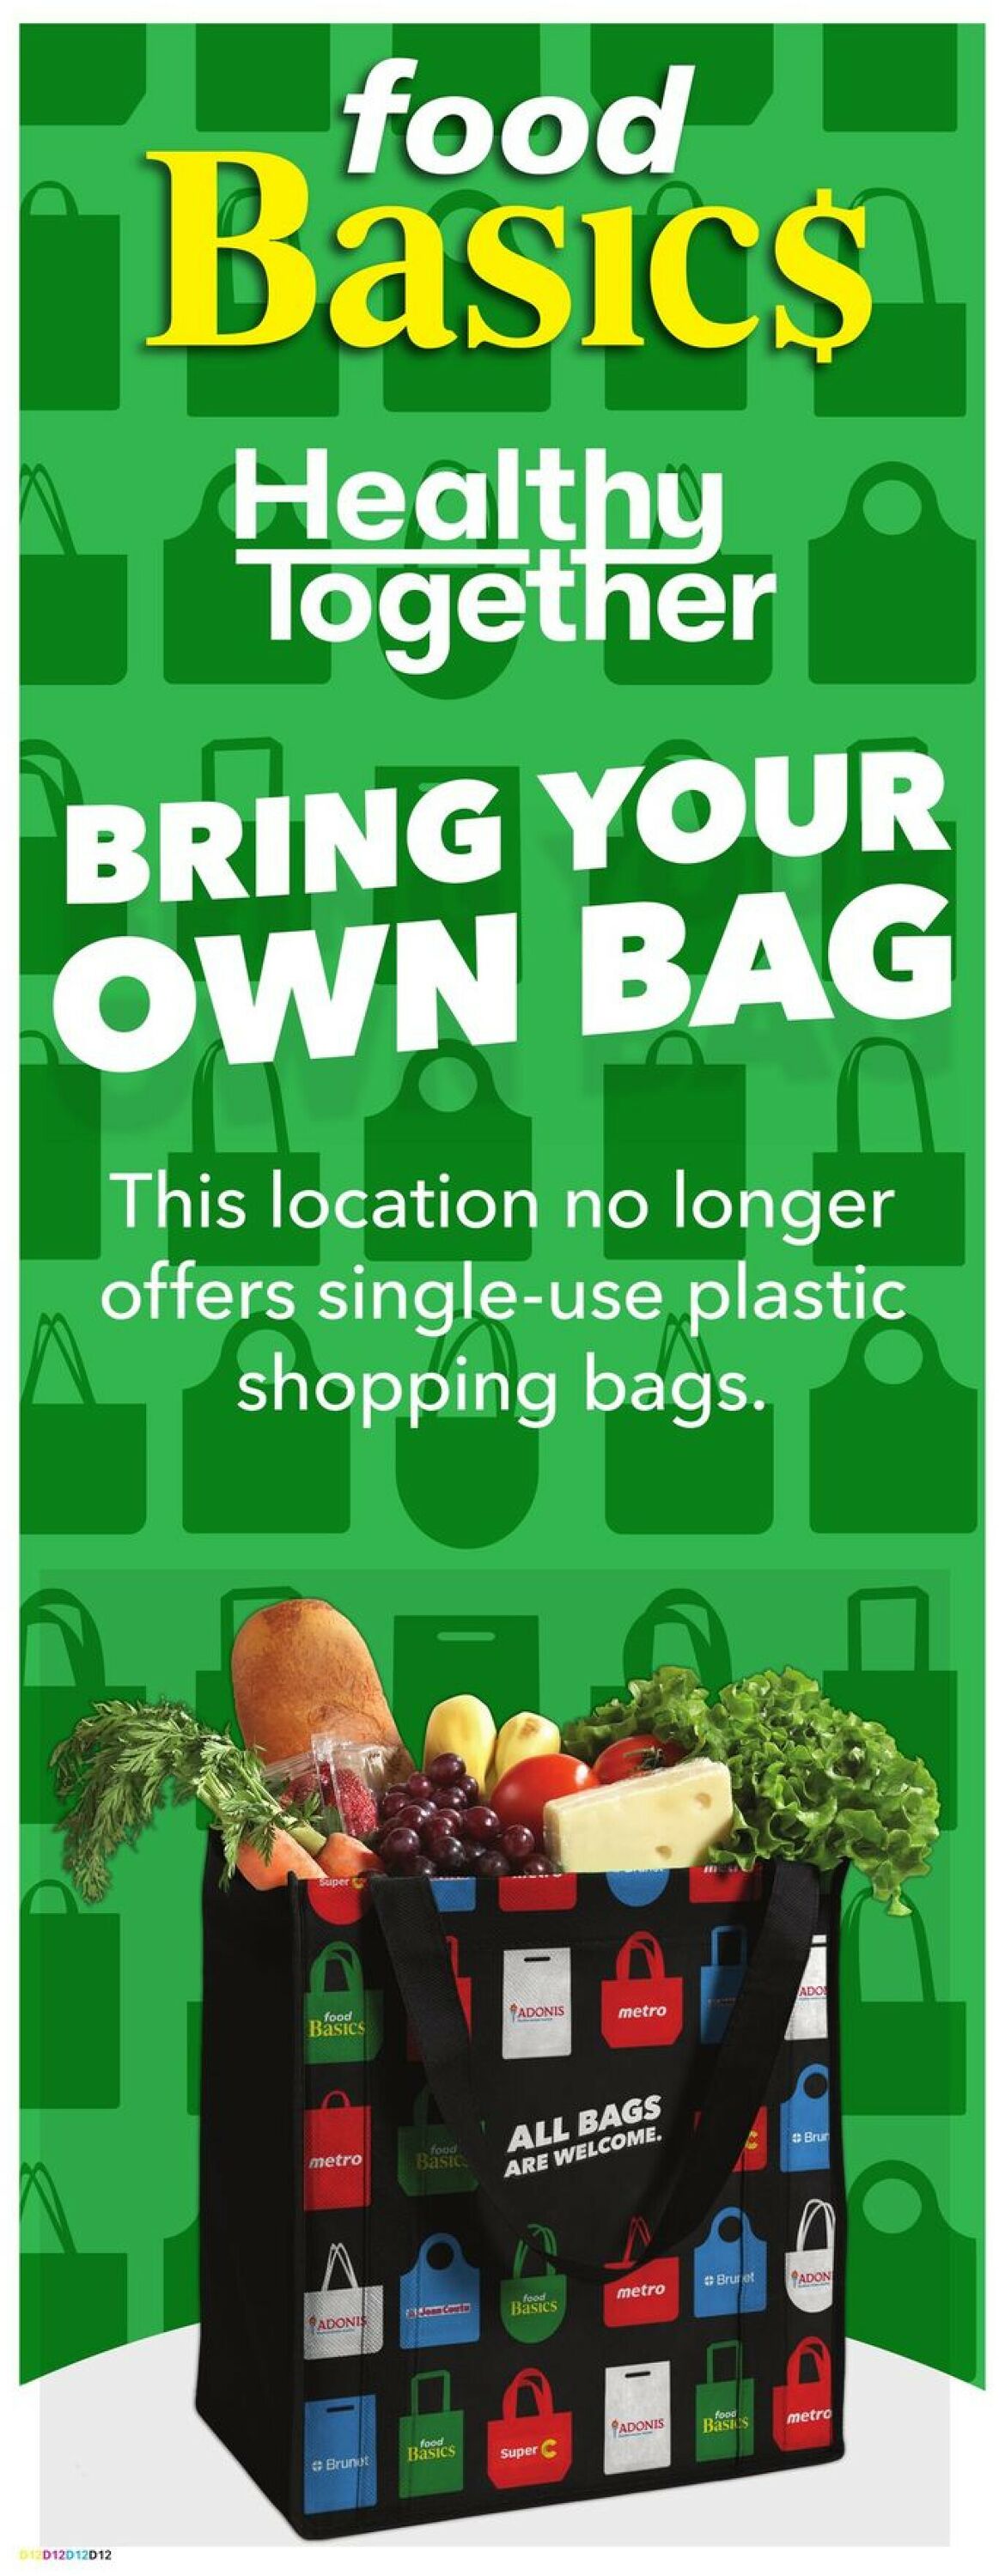 Food Basics Flyer from 12/15/2022